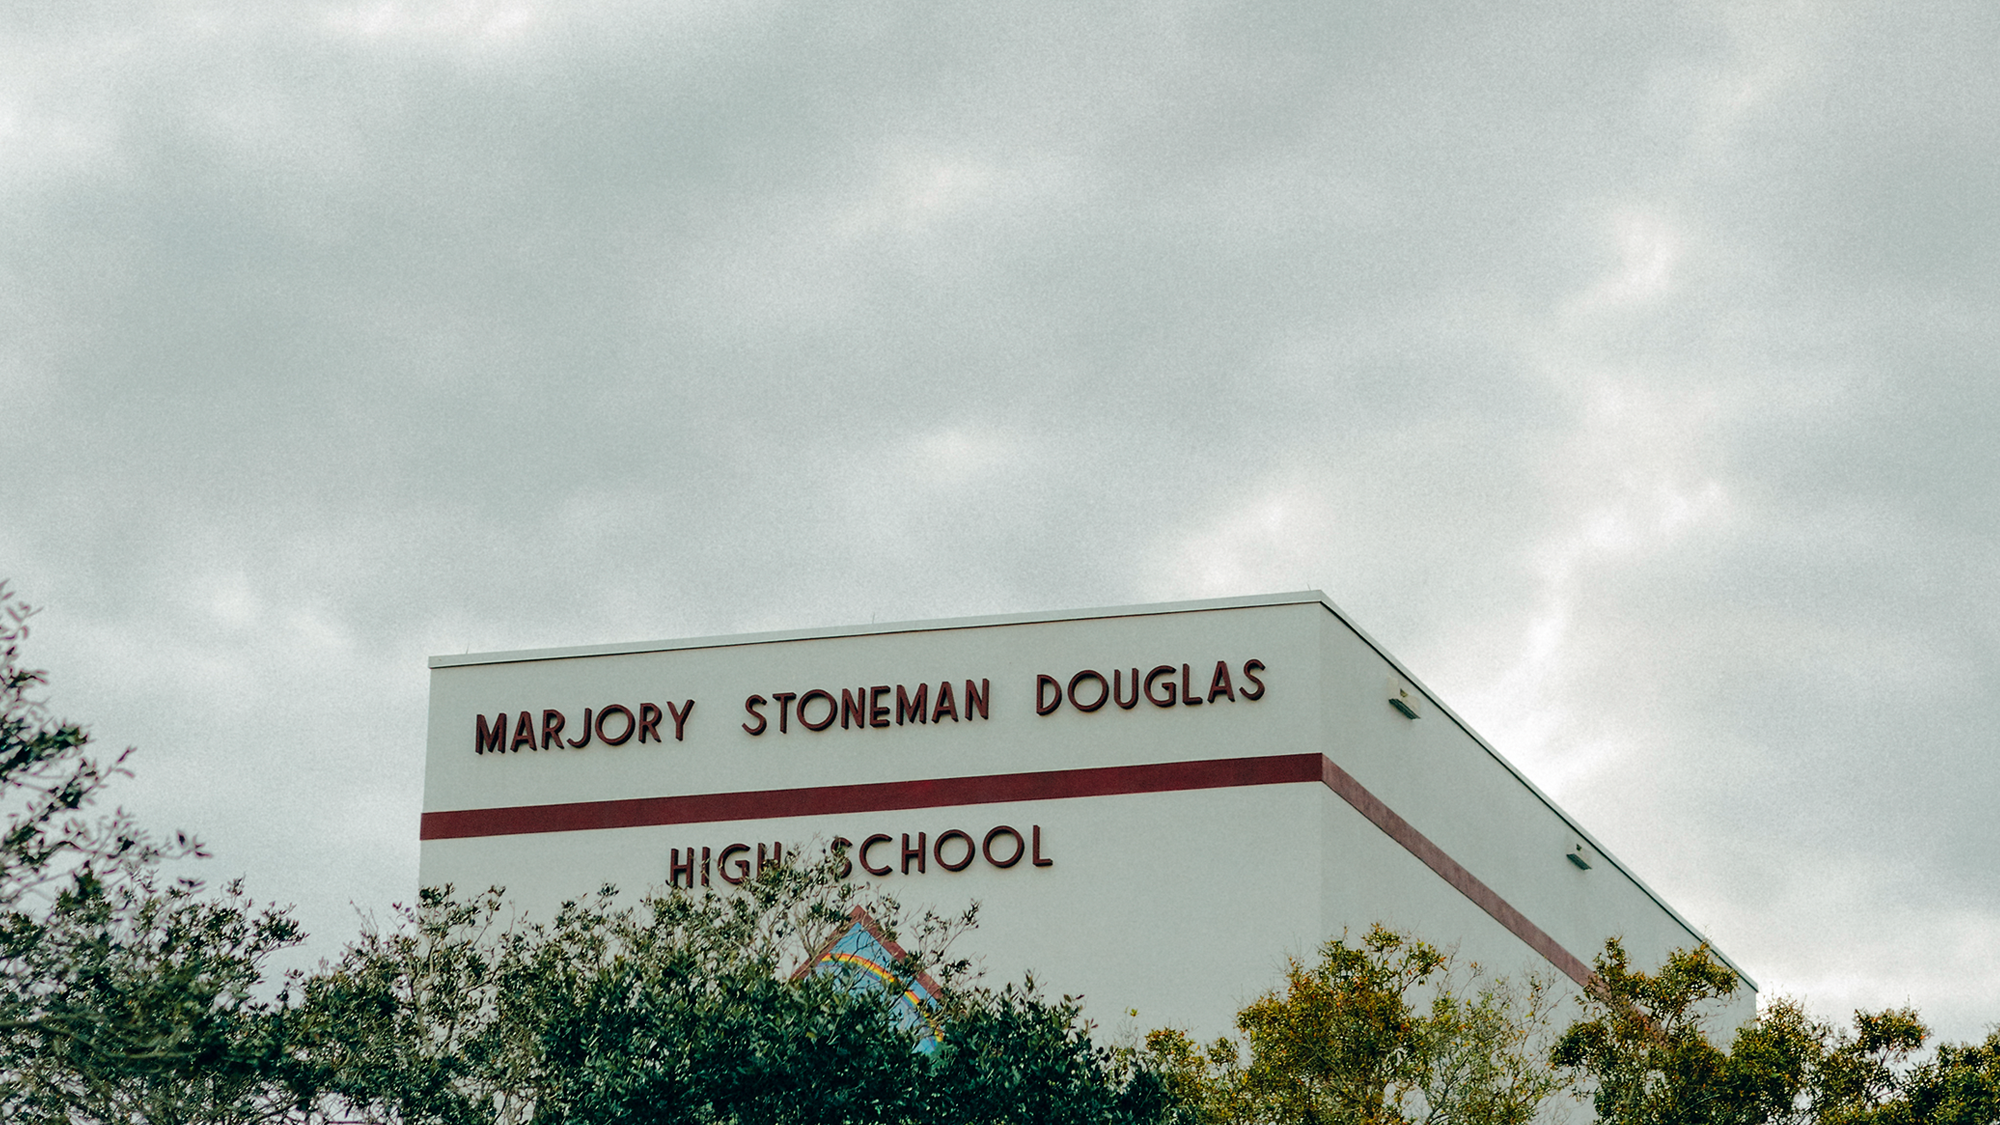 photo of building with "Marjory Stoneman Douglas High School" on it, behind trees against cloudy gray sky